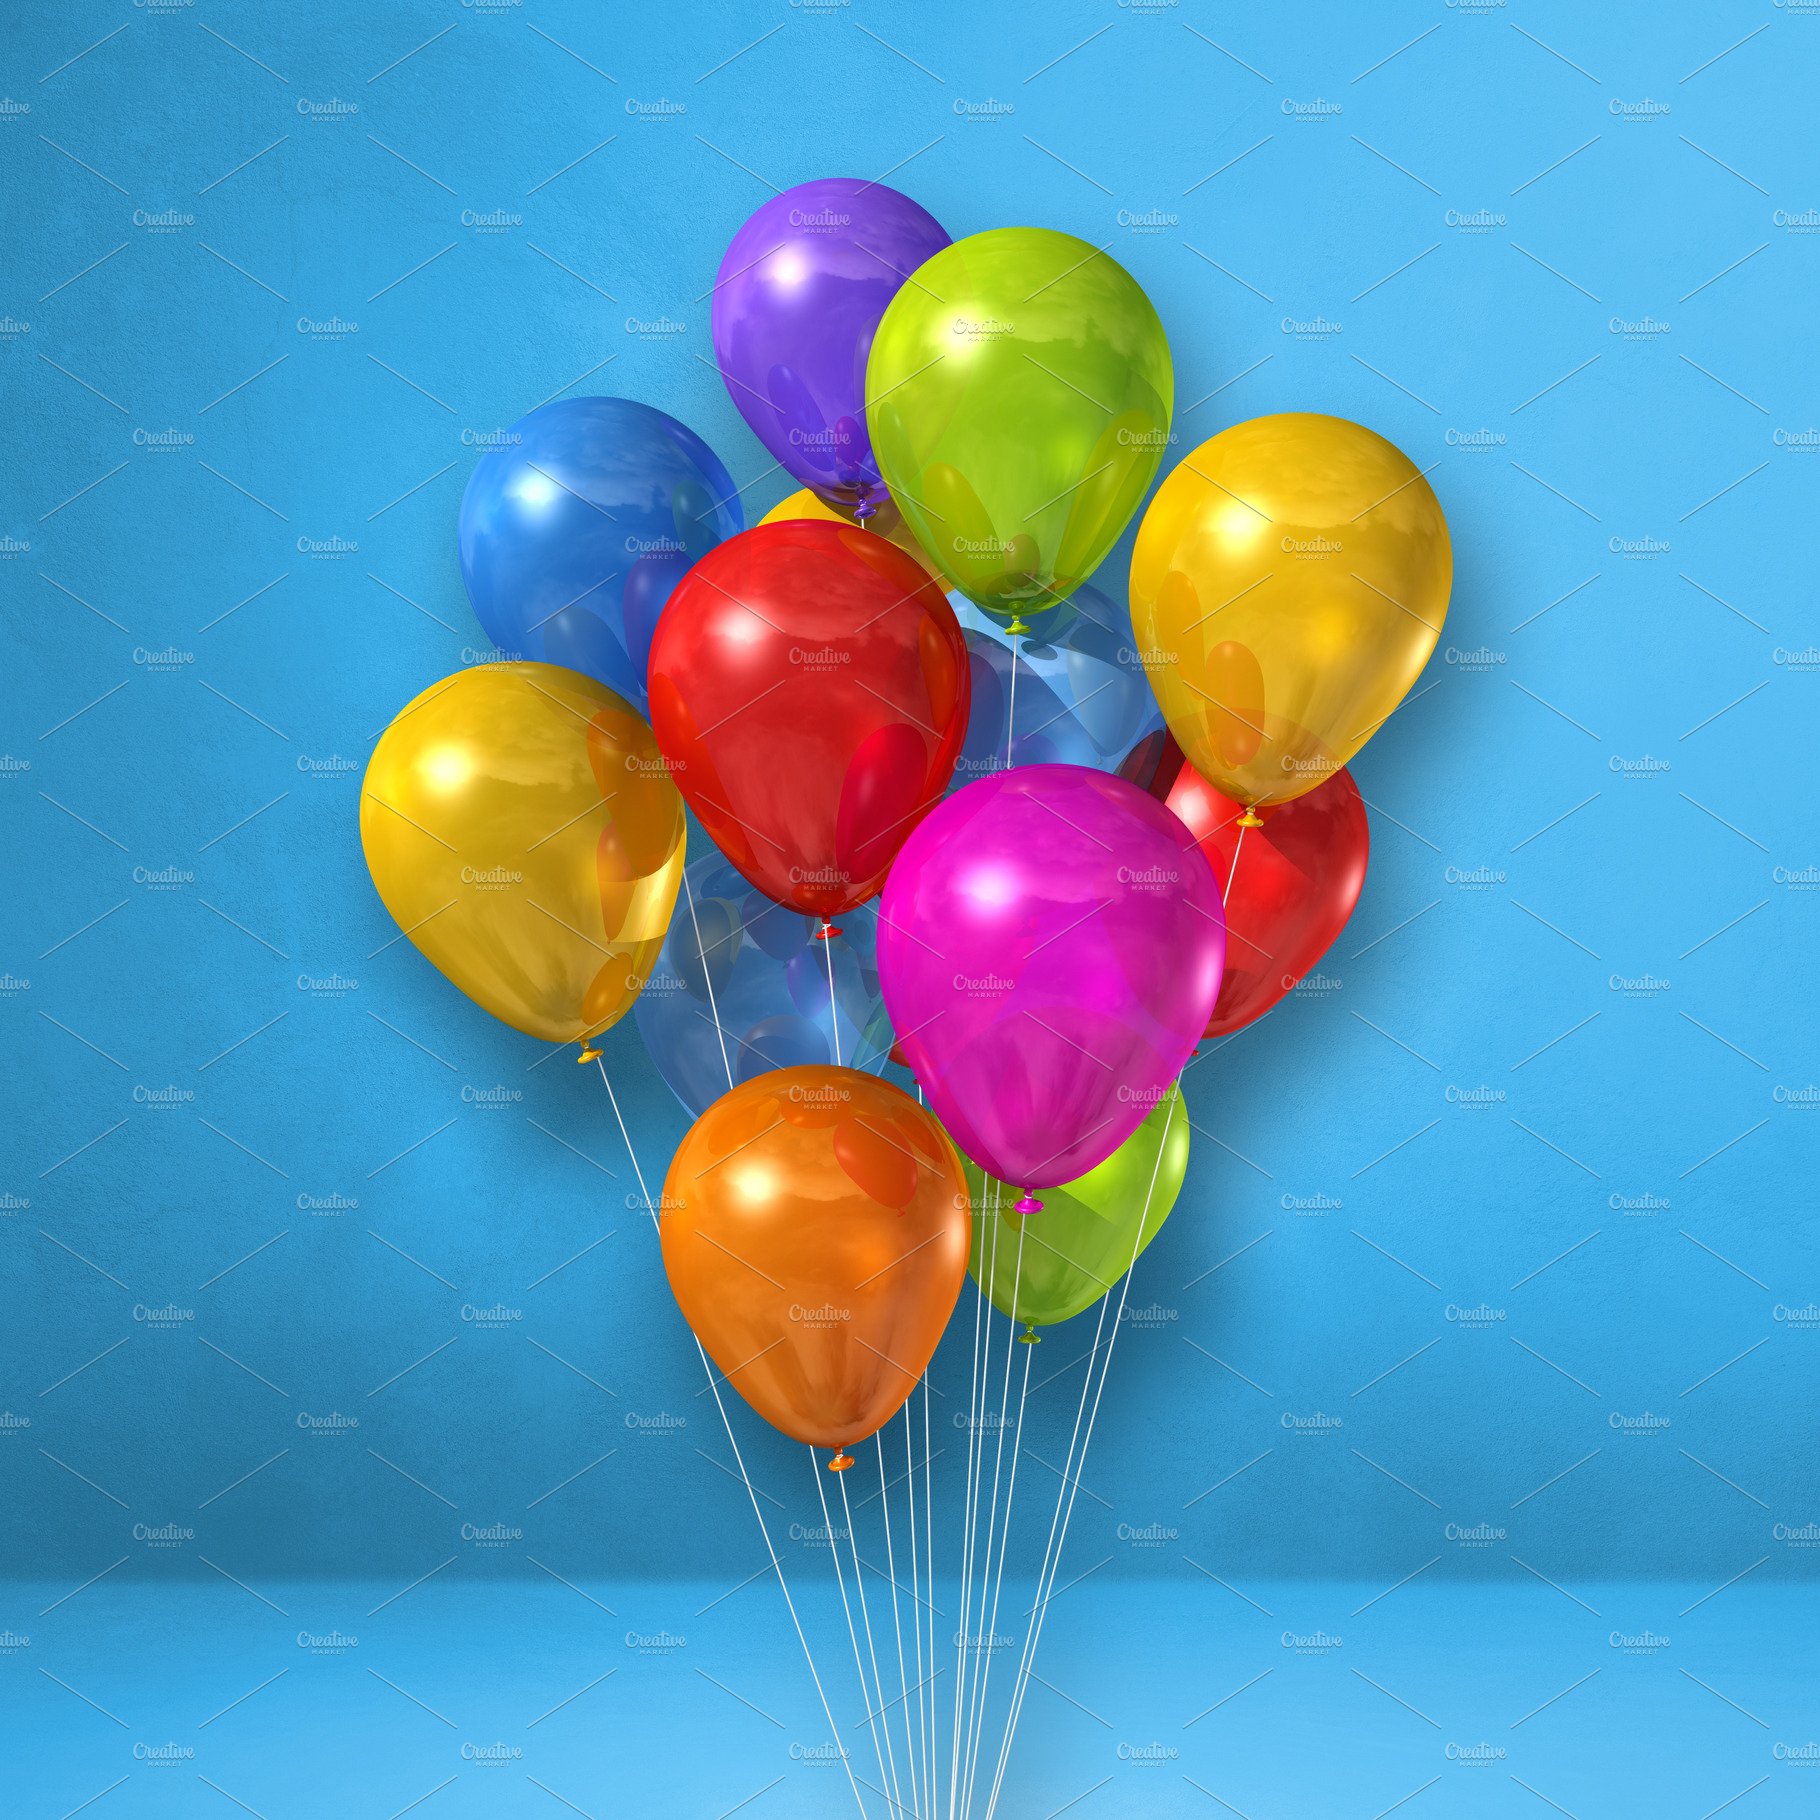 Colorful balloons bunch on a blue wall background cover image.